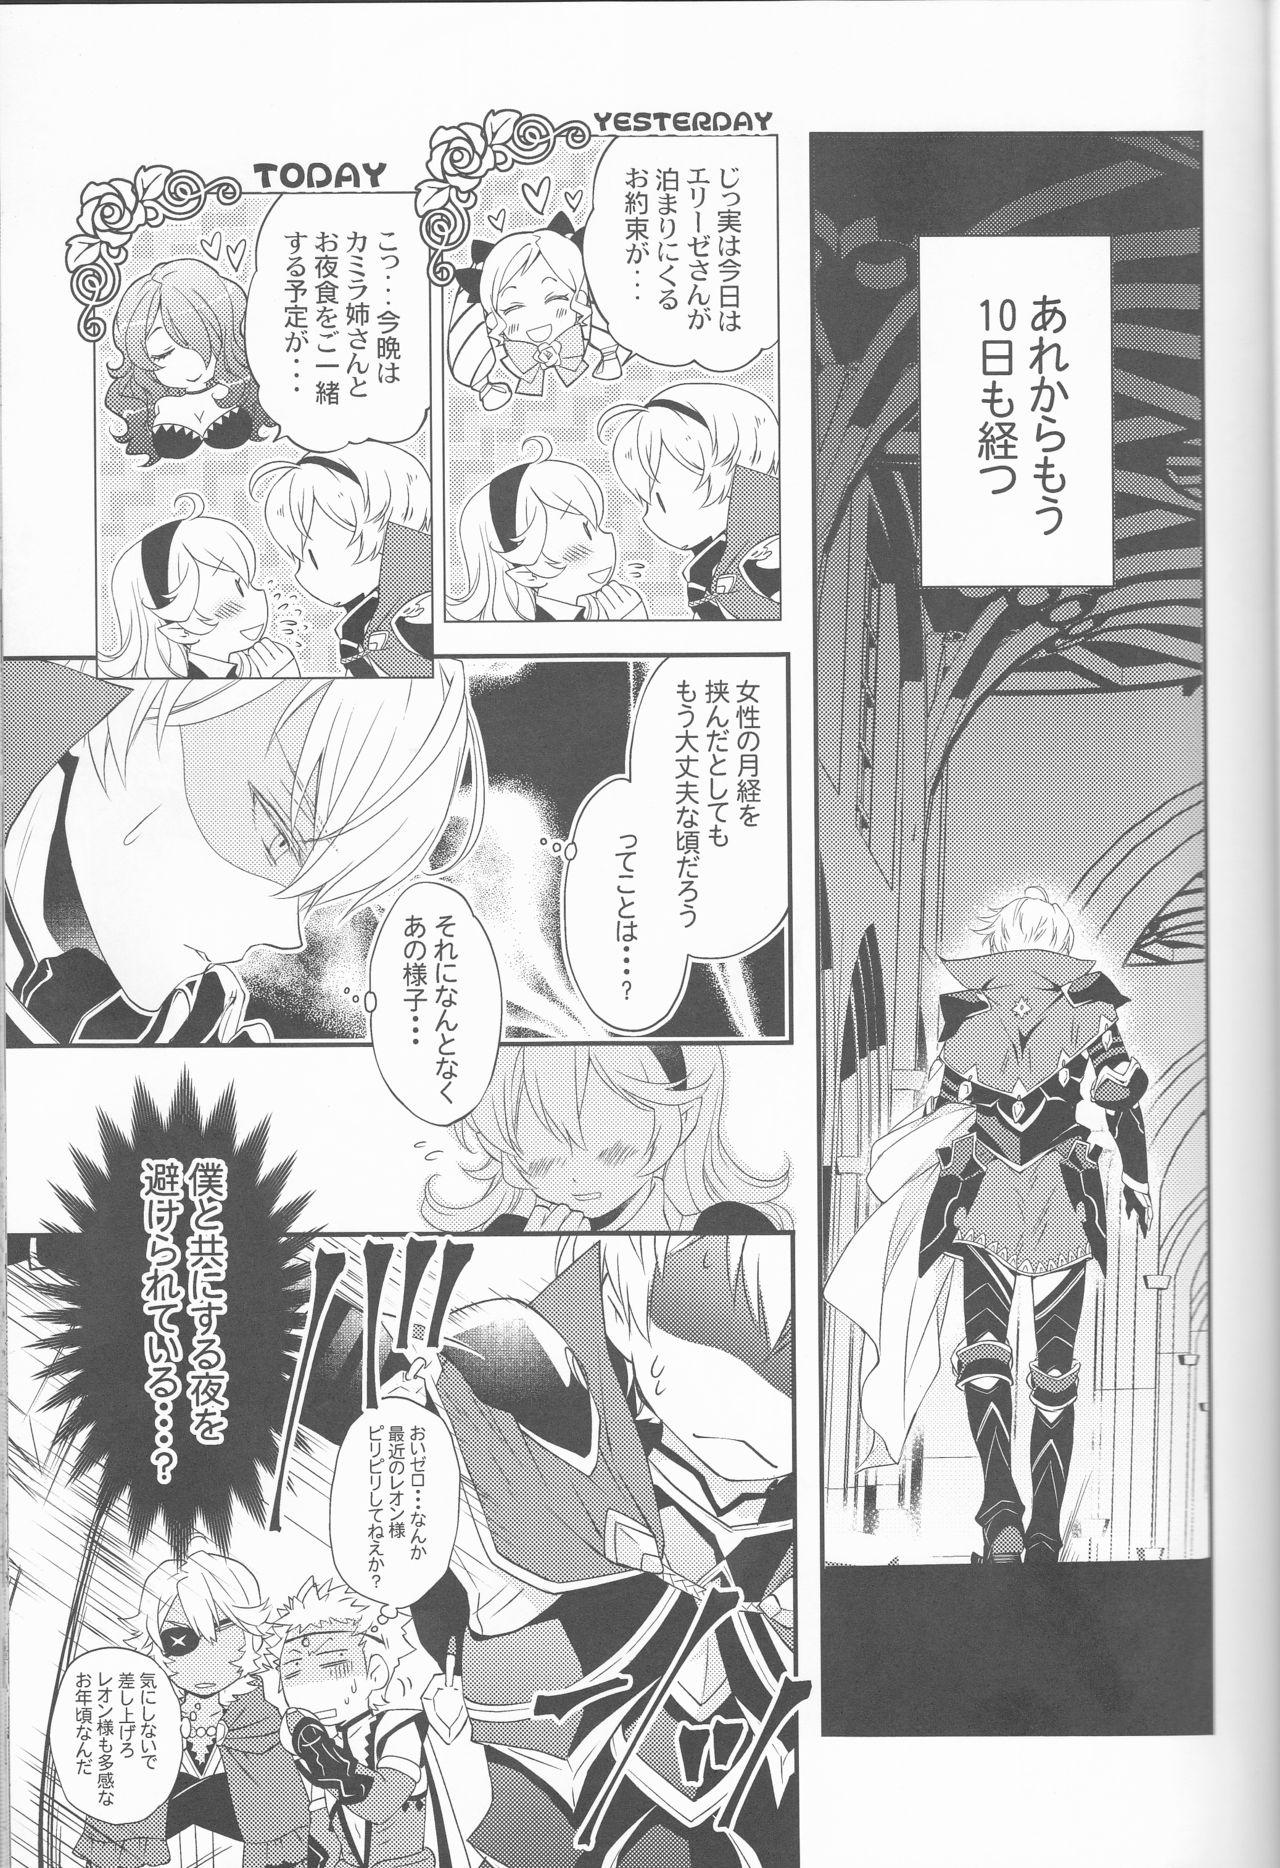 Peitos CROSSING LOVE - Fire emblem if Wank - Page 9